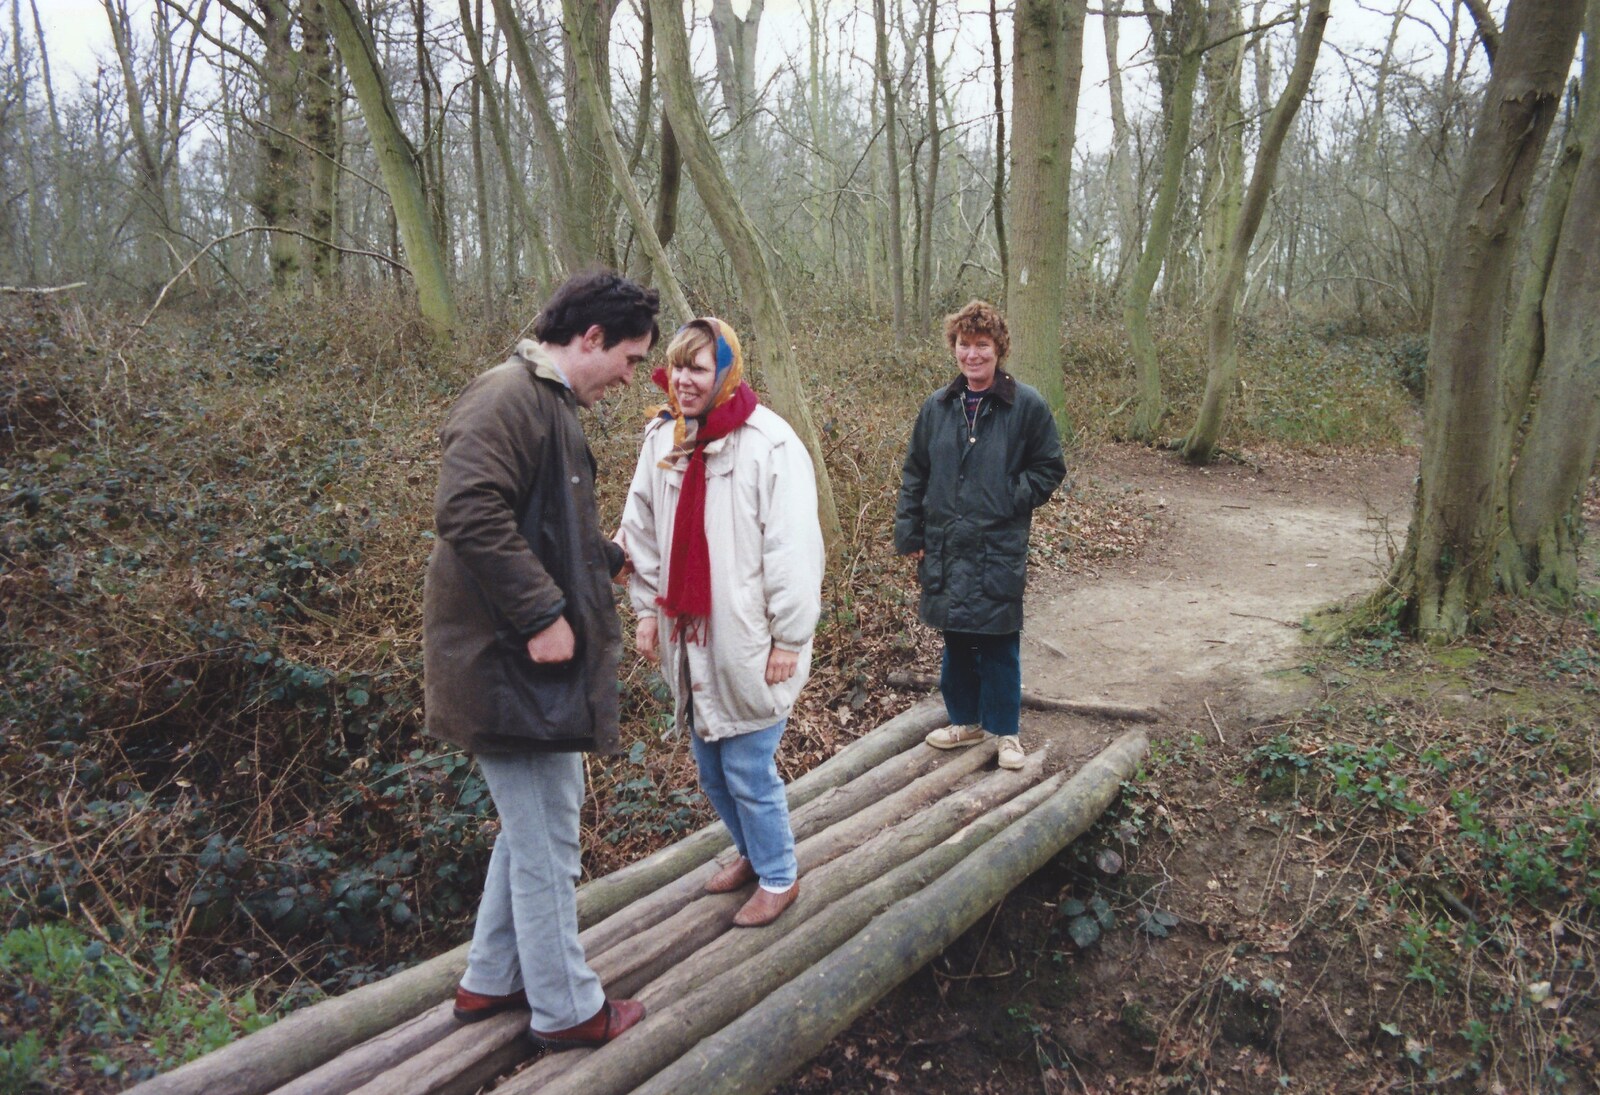 David, Janet and Brenda on a log bridge from A Walk in Tyrrel's Wood, Pulham St. Mary, Norfolk - 23rd February 1991